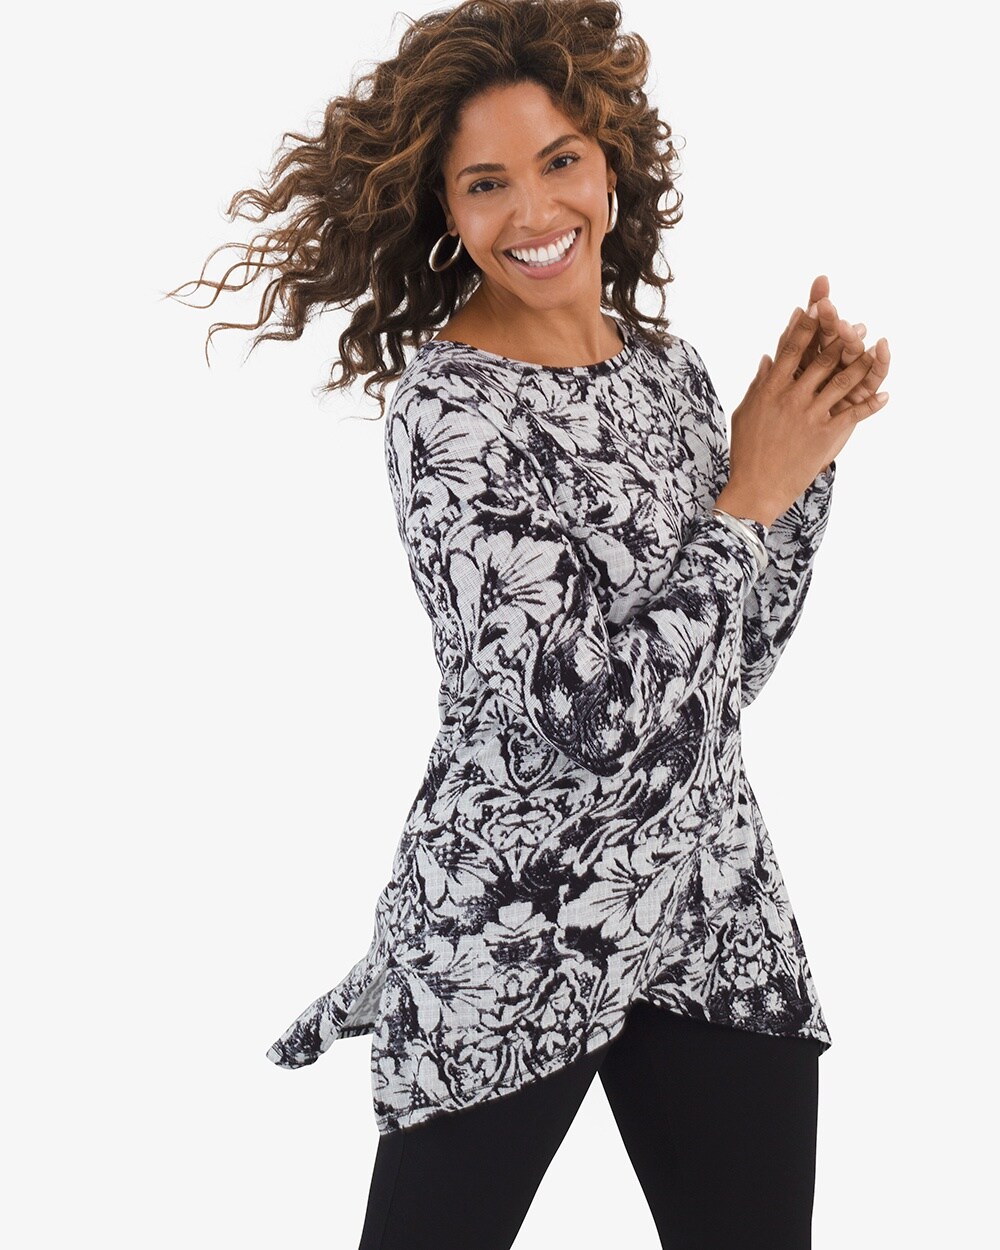 Zenergy Black-and-White Floral Tunic